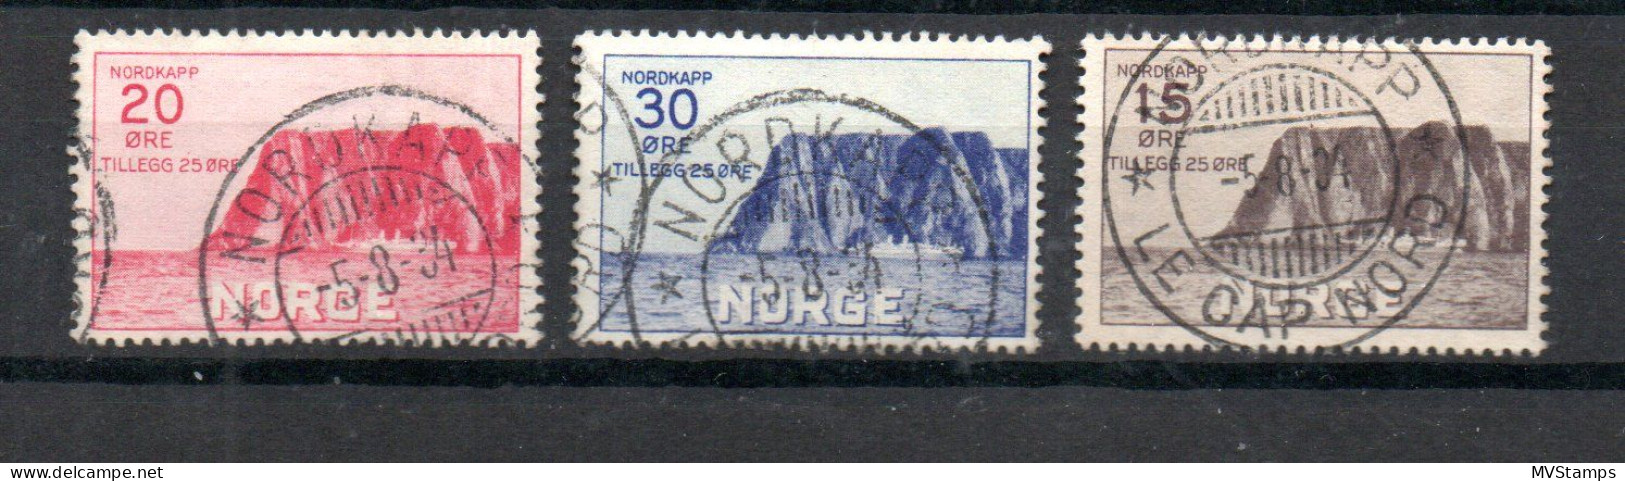 Norway 1930 Old Set Northcape Stamps (Michel 159/61) Nice Used Nordkap - Usati